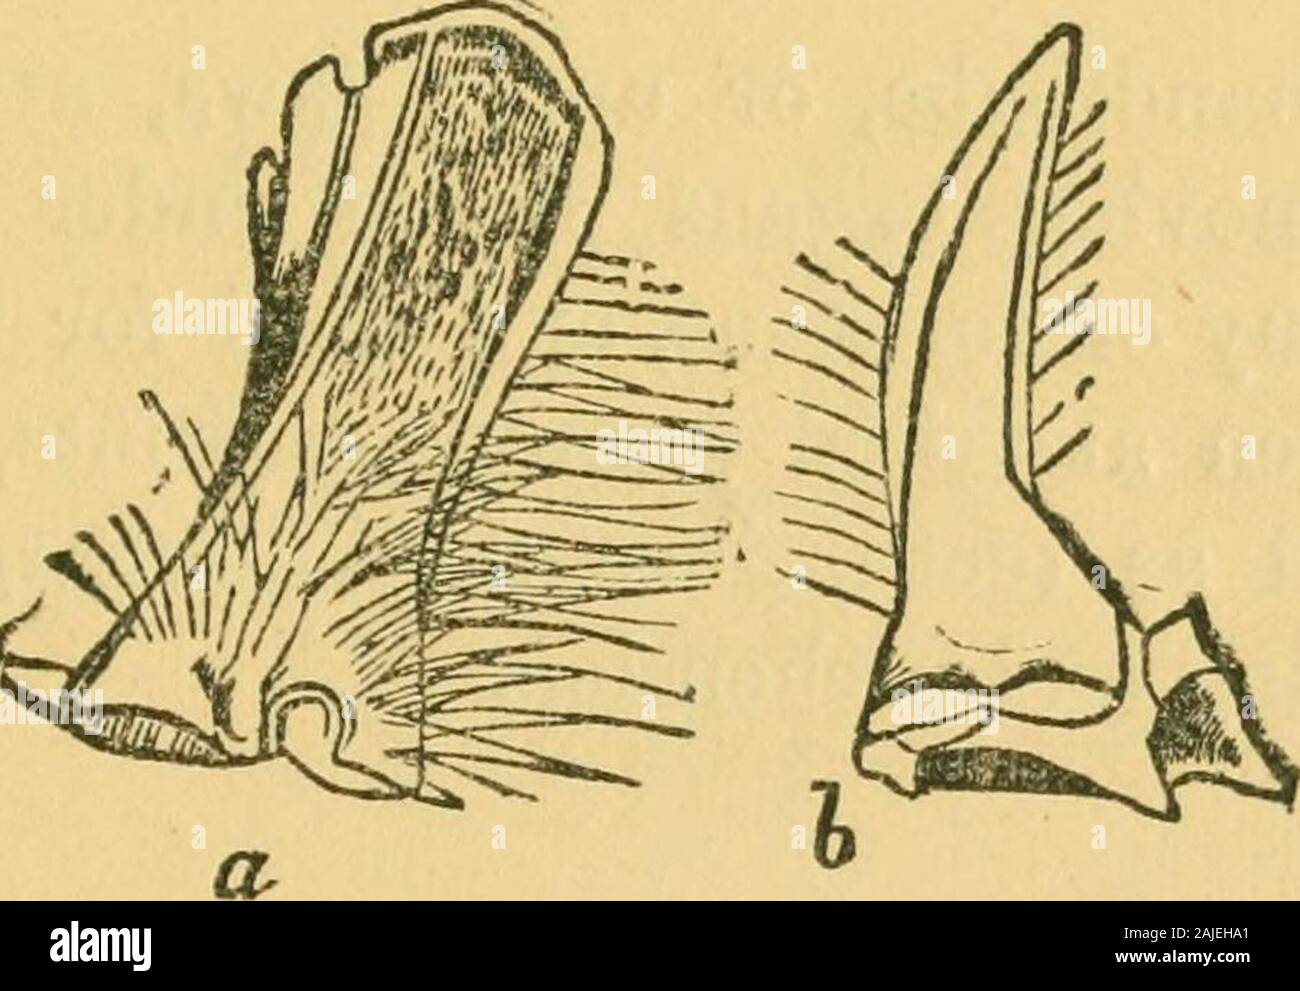 Structure and classification of insects . HEAD OF THE BEE. The Os, or Mouth, of the insect is provided withBeven ordinary organs, differently modified in the twogreat divisions of masticators^ or chewing insects, andsuckers^ or sucking insects. These are, 1st, the upperlip (labrum) ; 2d, the lower lip (labium); 3d, labial andother palpi, or feelers ; 4th, the upper jaws (mandibles);5th, under jaws (maxillae); 6th, the tongue (lingua);and, 7th, the pharynx.. a, Jaw of Bombus—nest digging bee.5, do. Nomada—parasite bee. , or upper lip, is a movable organ. 1st. The labrumfastened to the upper par Stock Photo